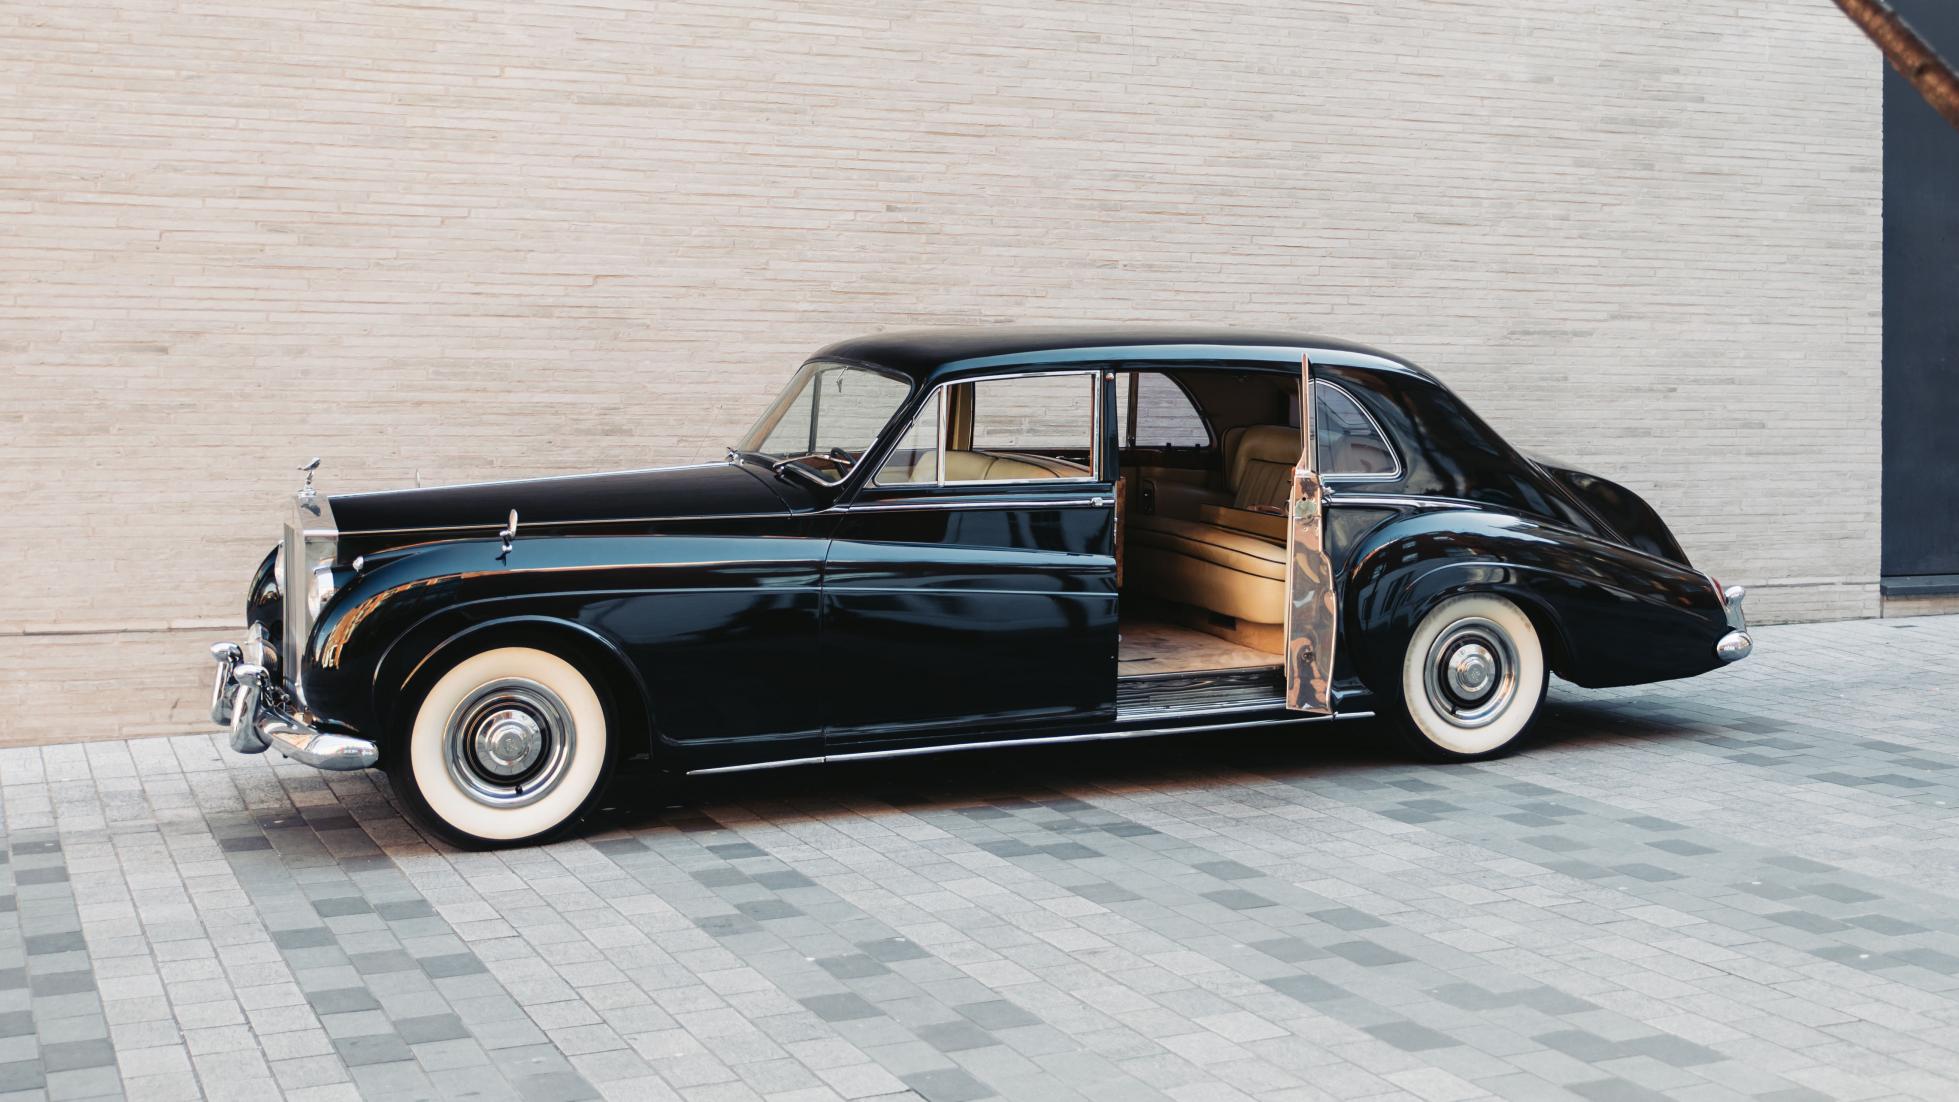 A company is converting super-luxury classic cars into EVs